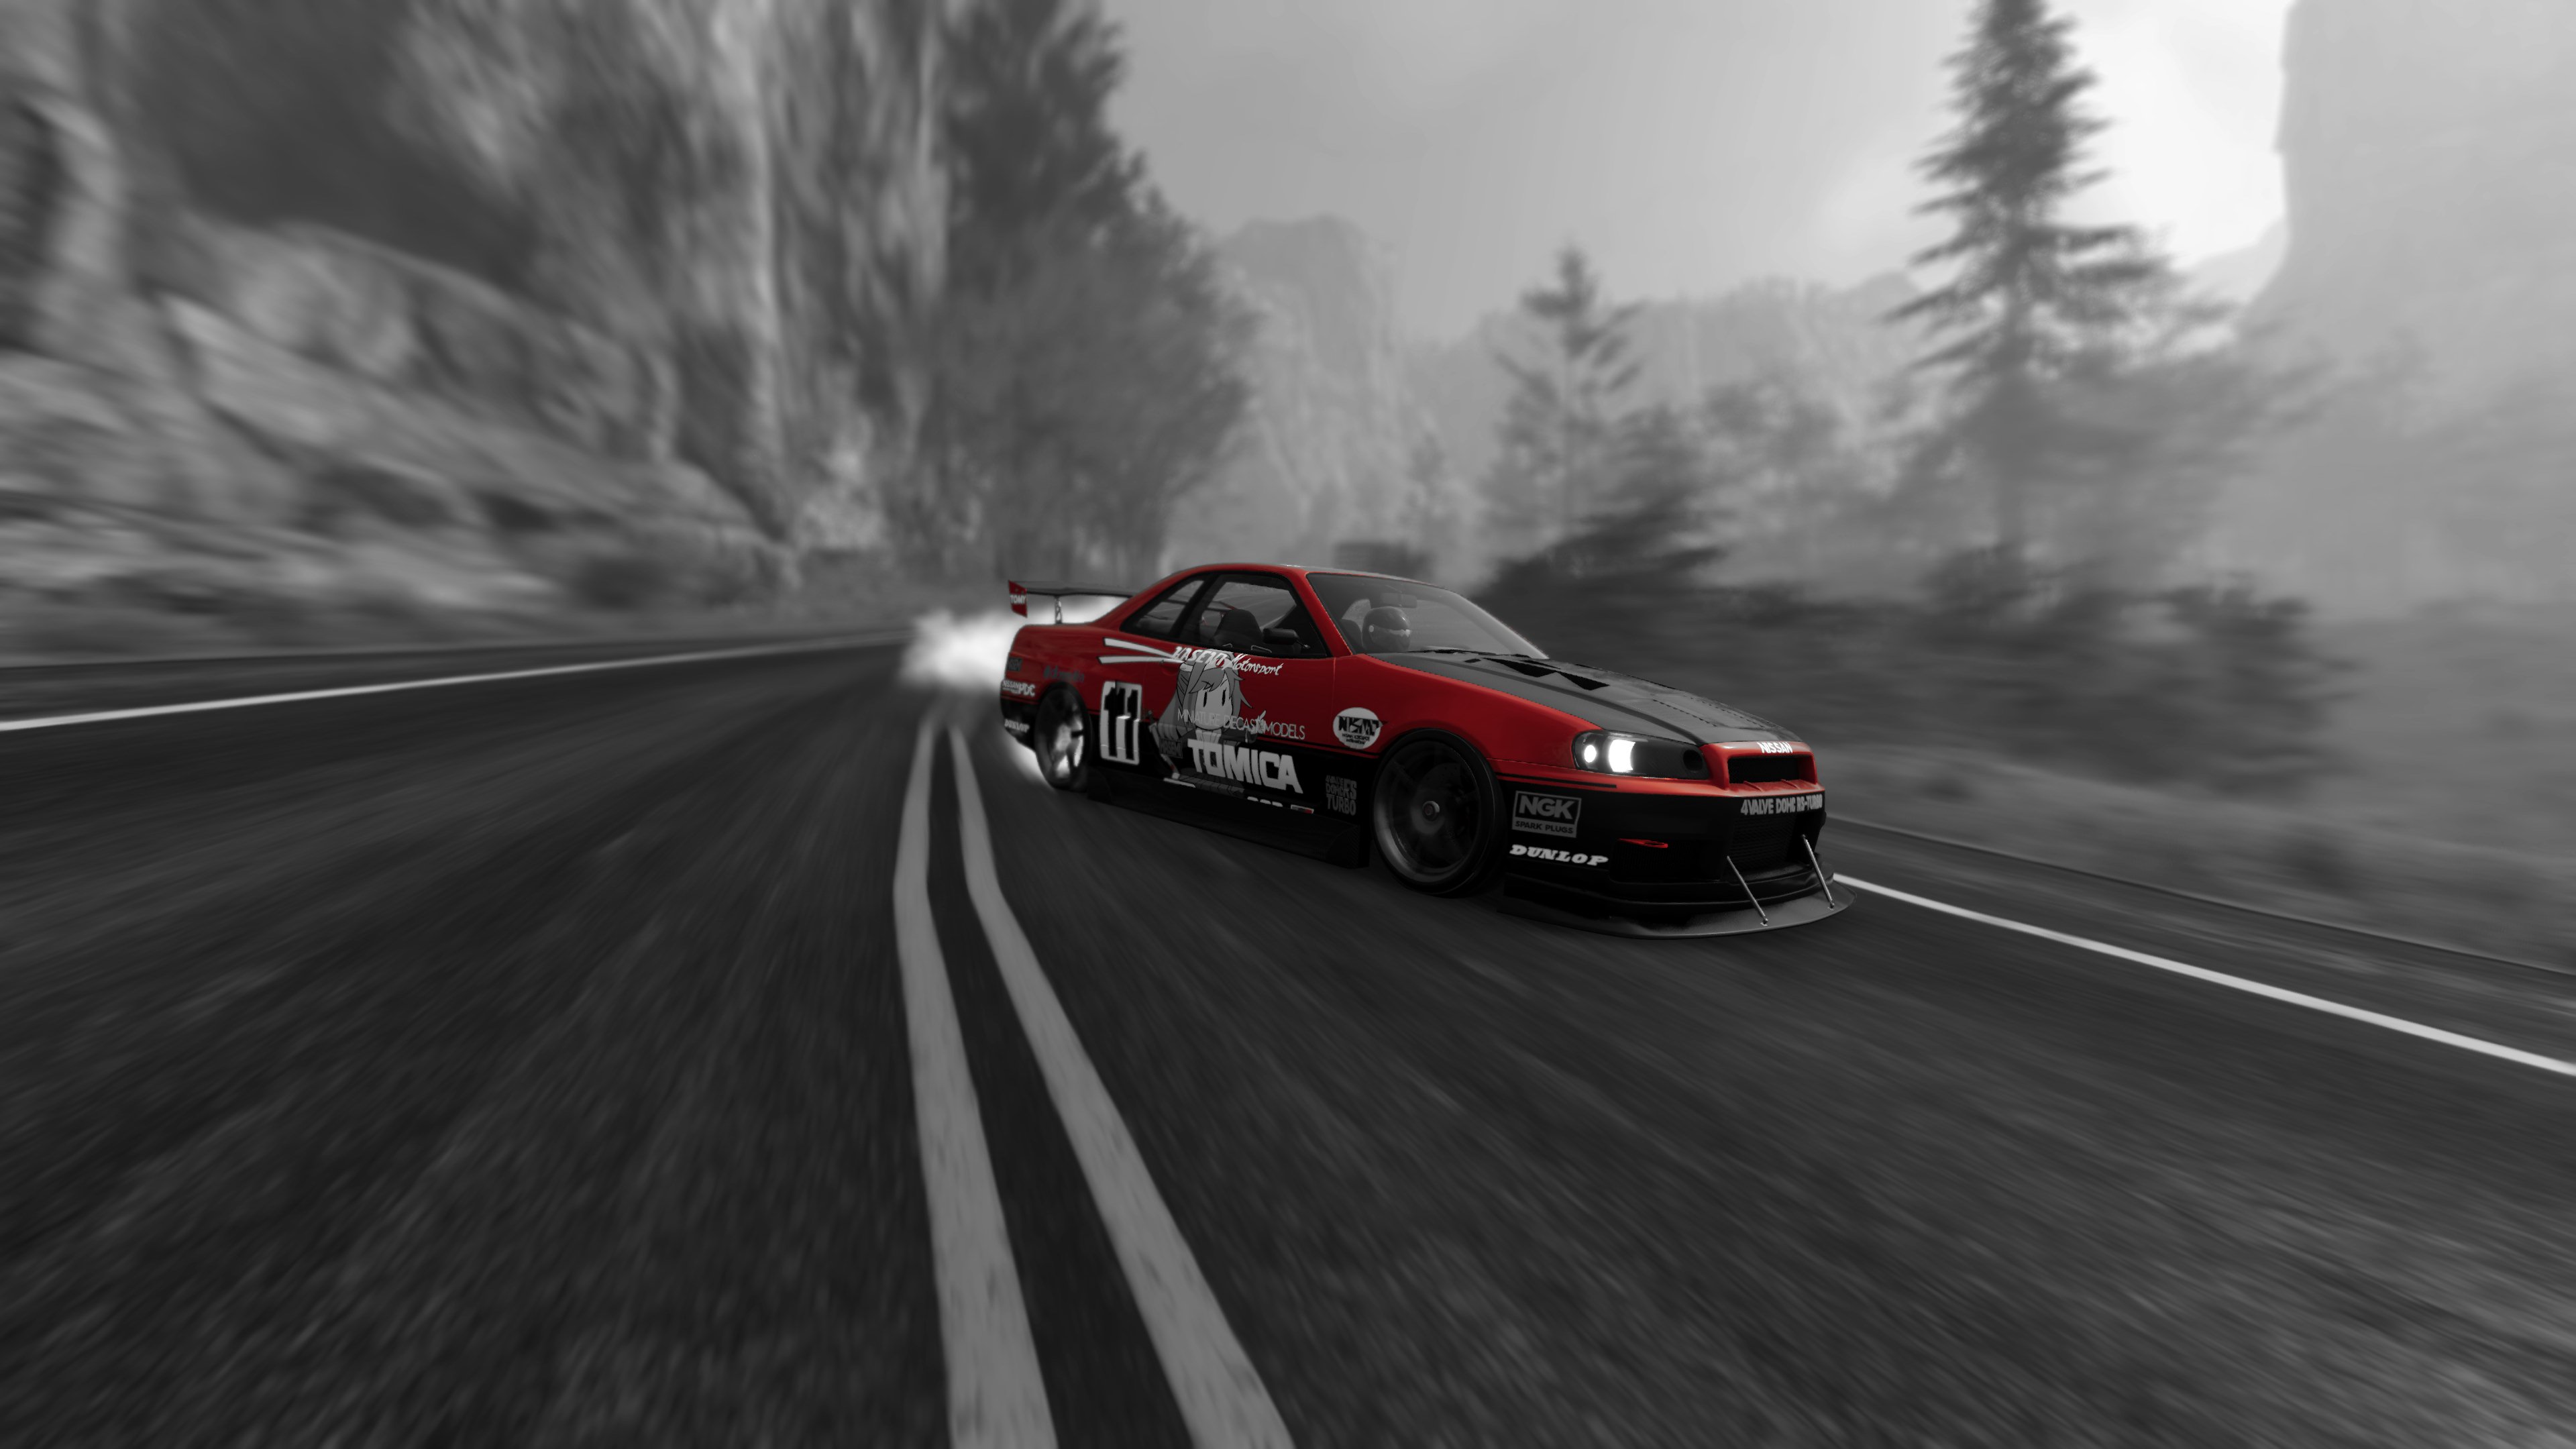 Skyline Gtr Drift The Crew 2 Screen Shot Game Poster Vehicle Video Games In Game 3840x2160